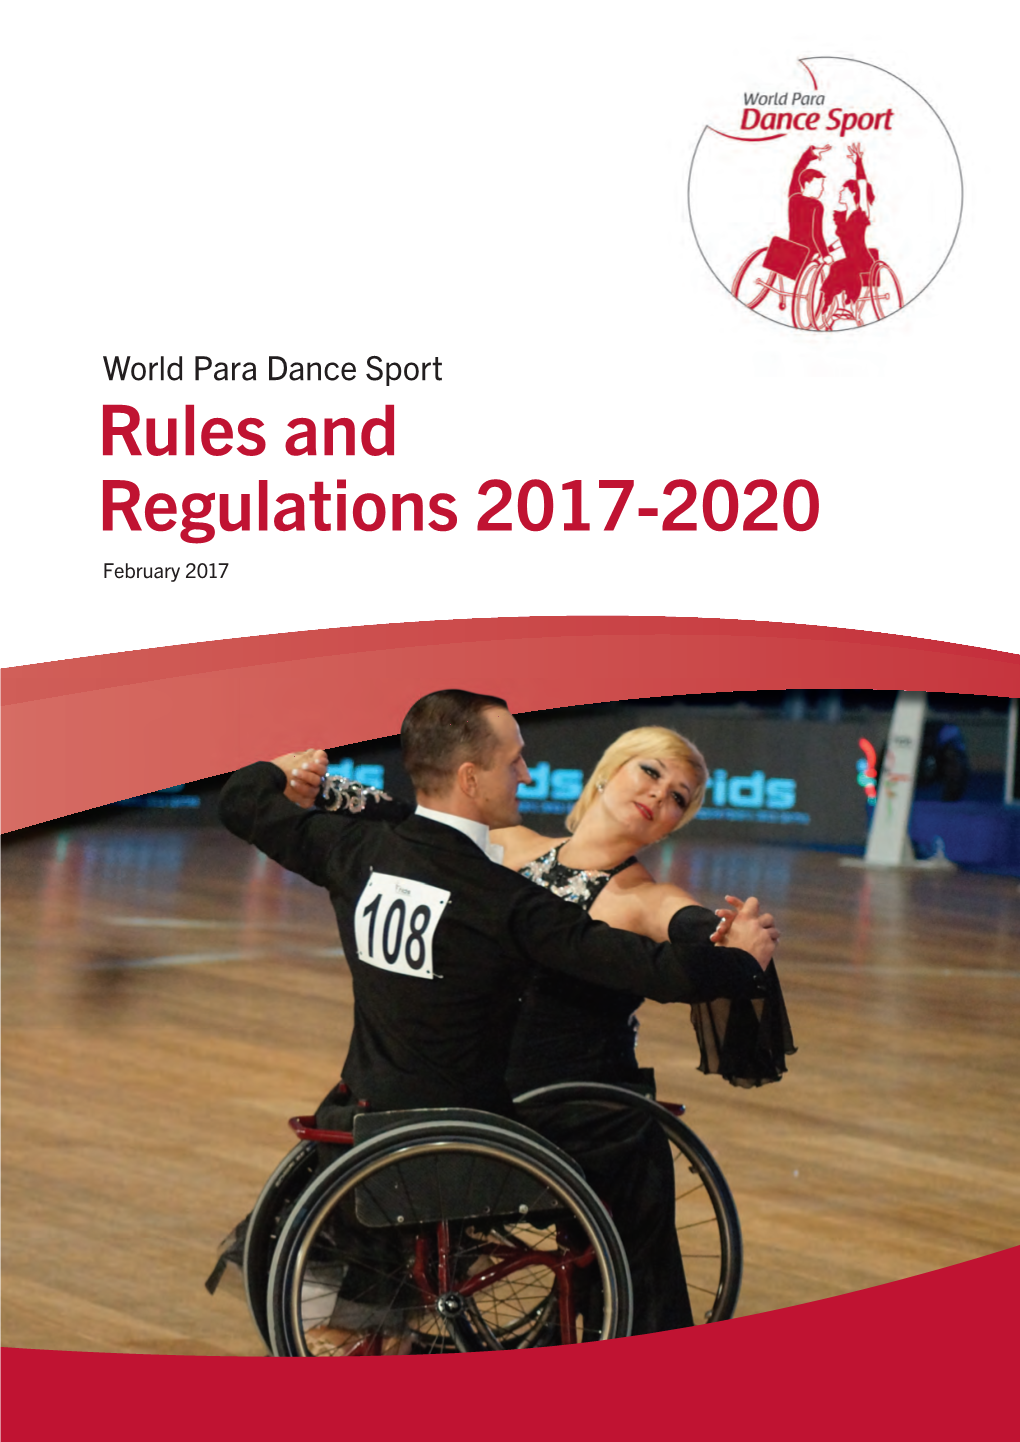 World Para Dance Sport Rules and Regulations 2017-2020 February 2017 O Cial World Para Dance Sport Supplier